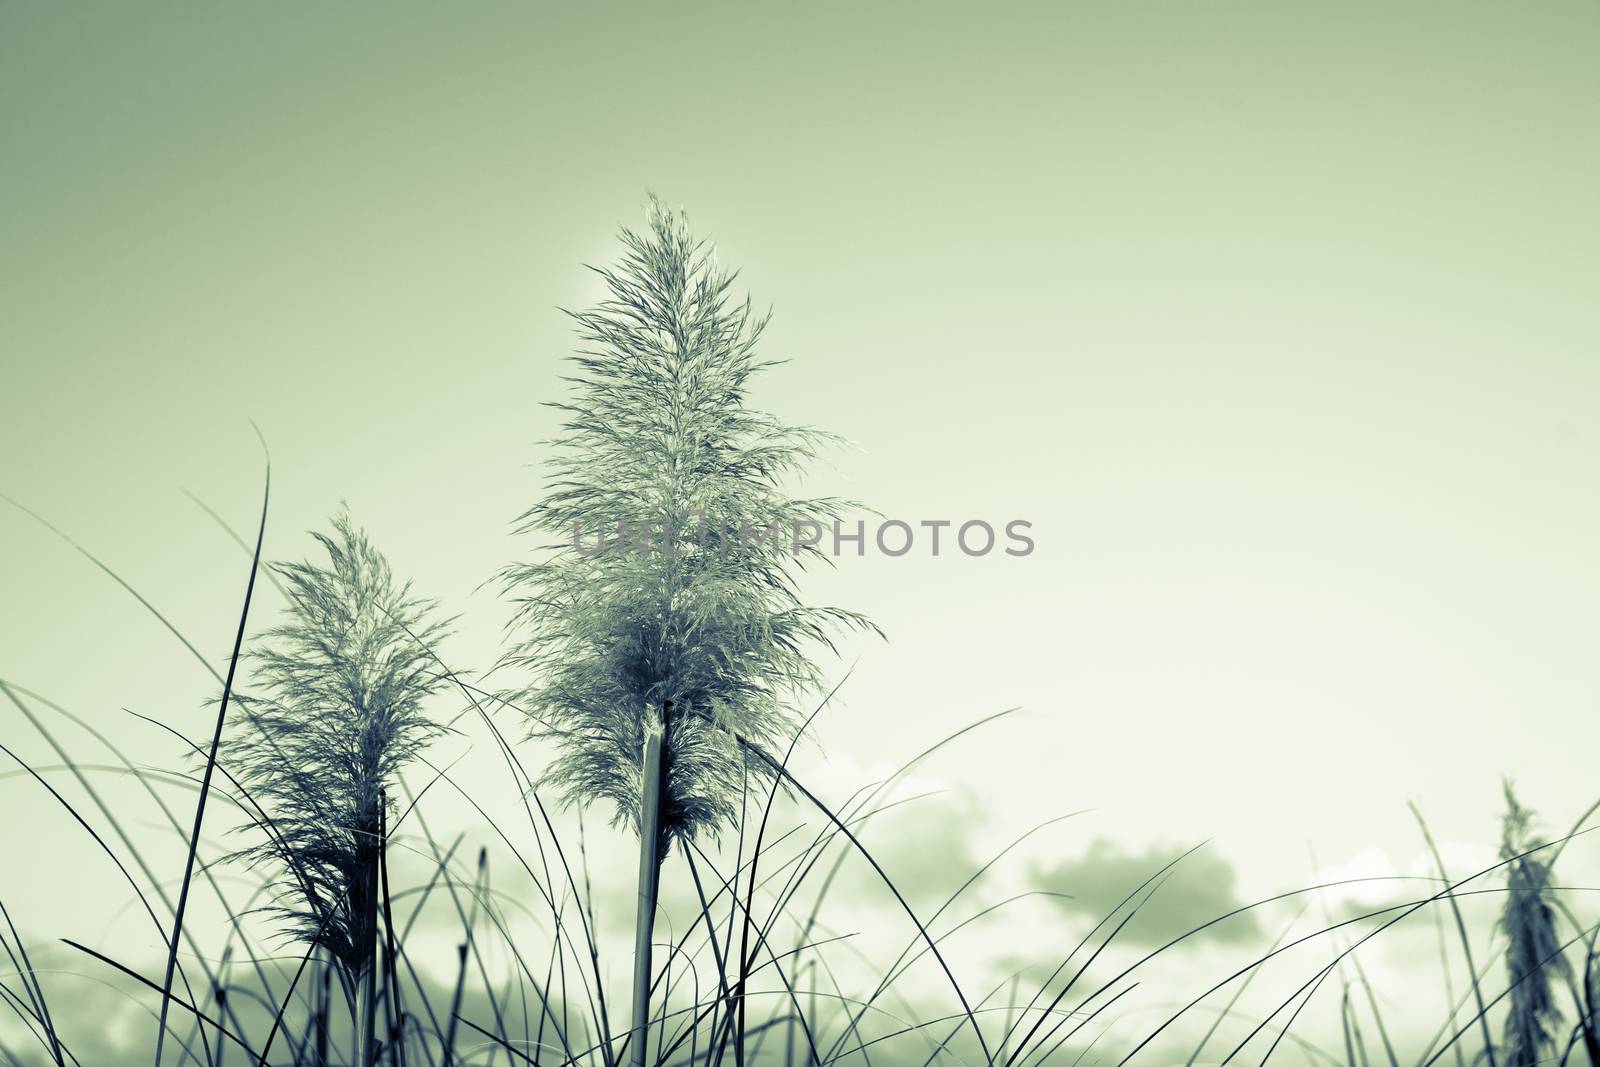 Retro image pampas grass, old faded effect low clouds and clear sky with vignette.